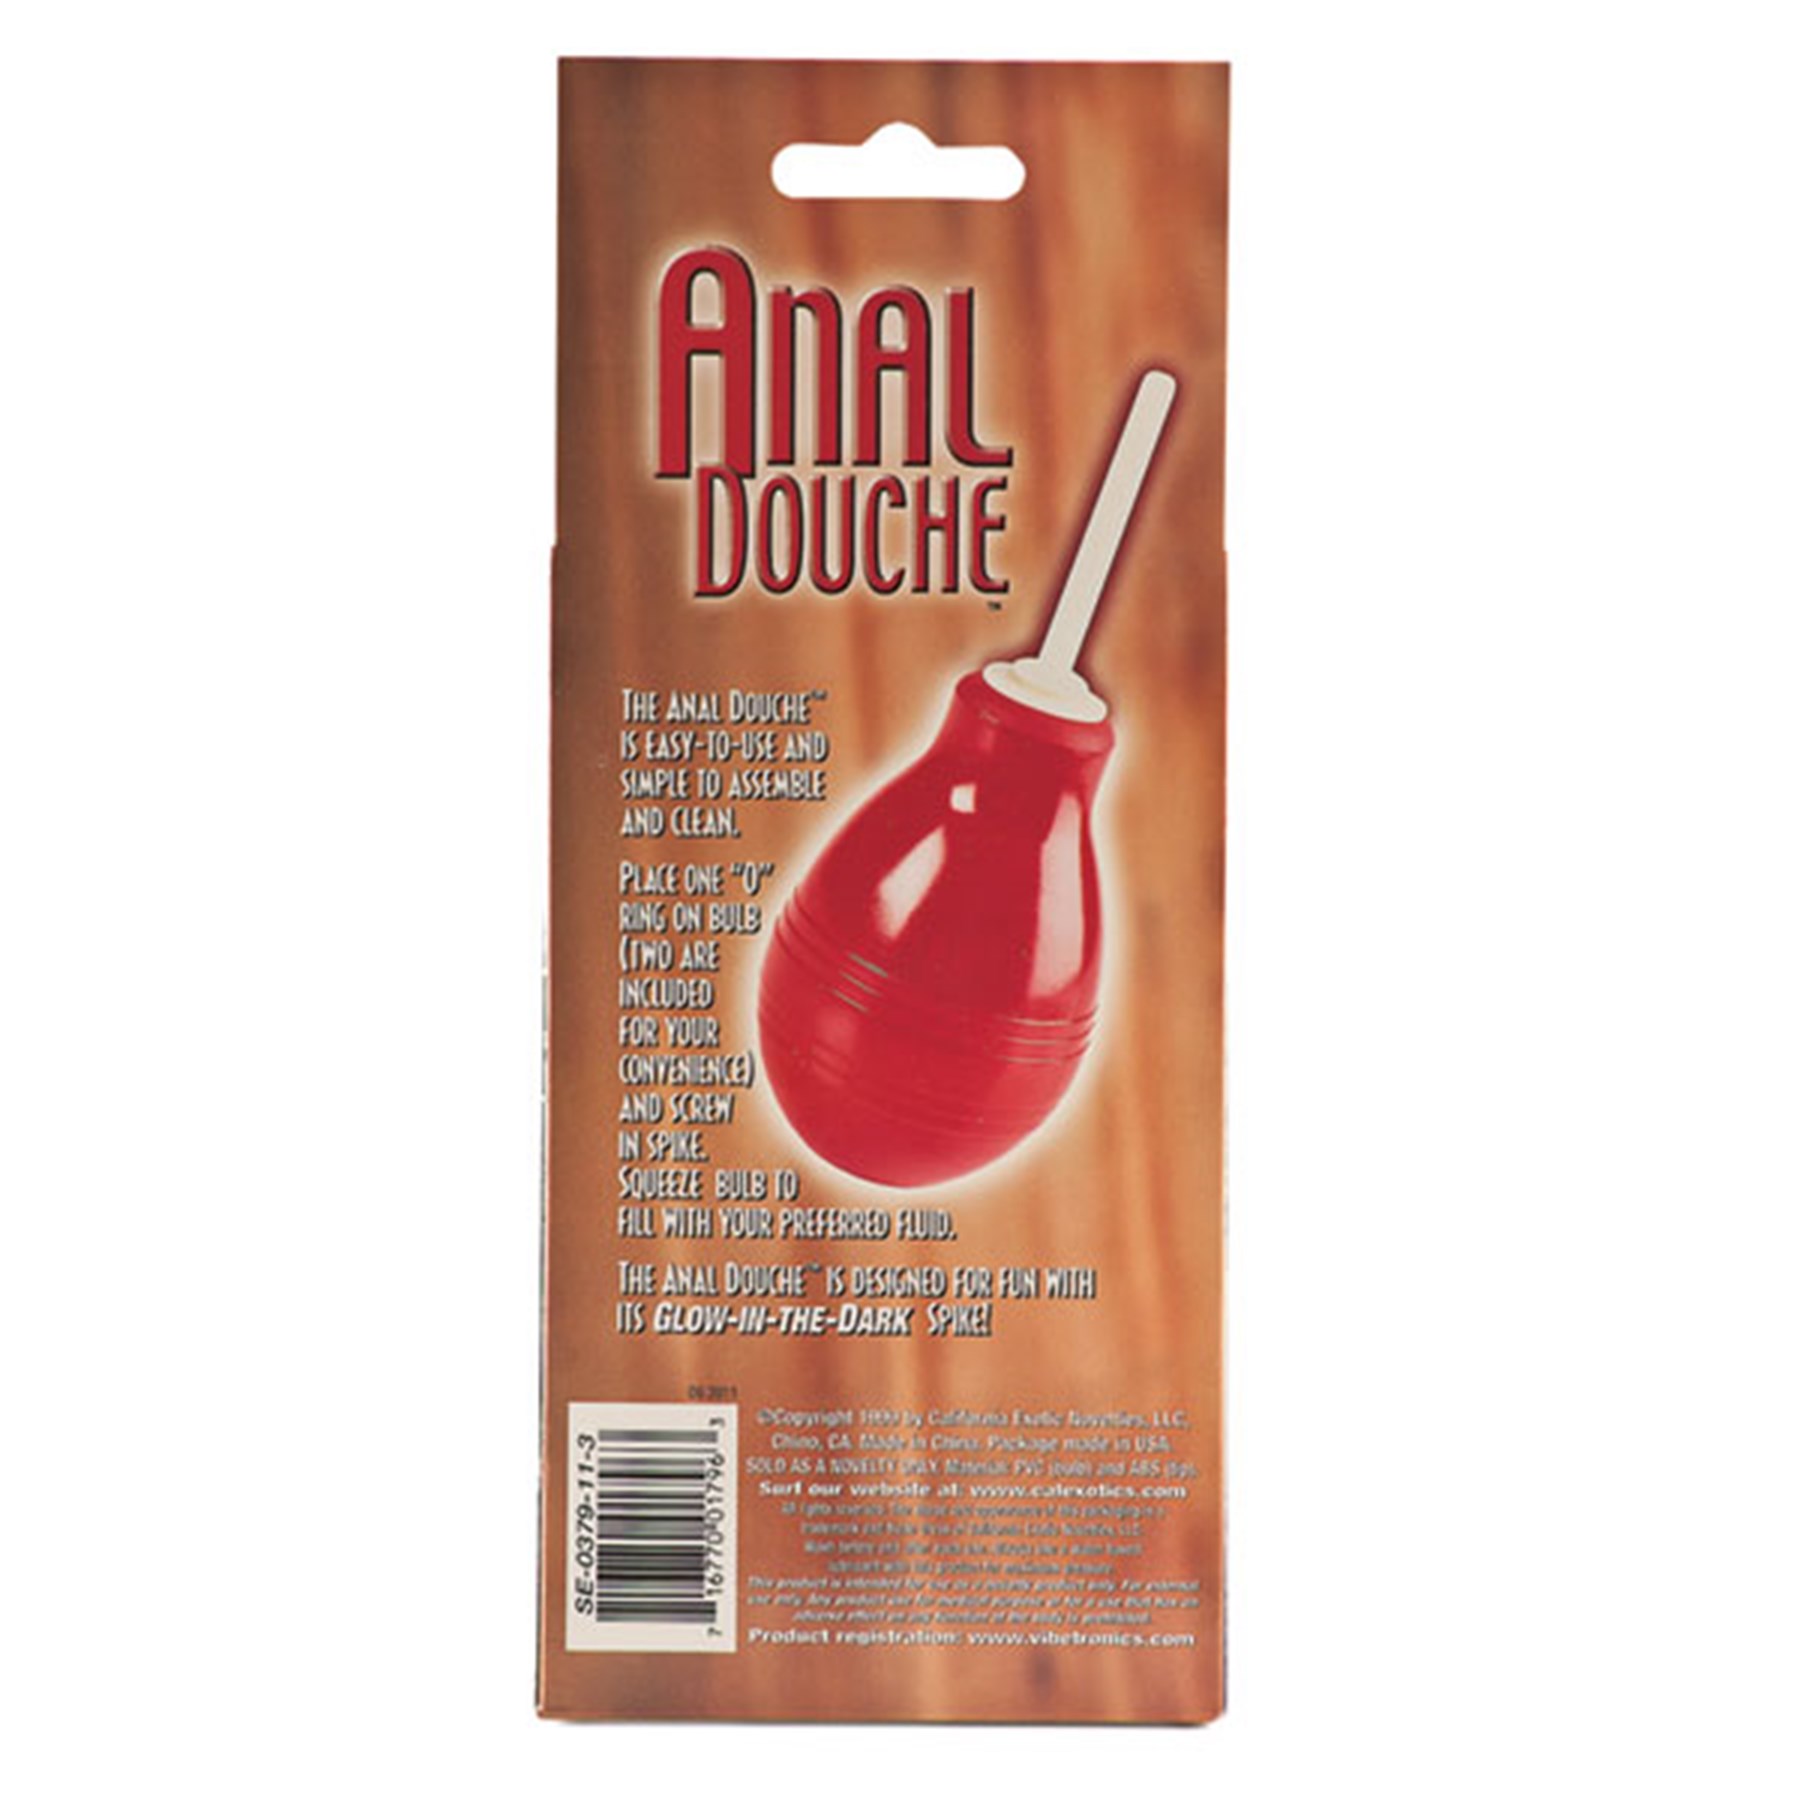 anal douche back of box